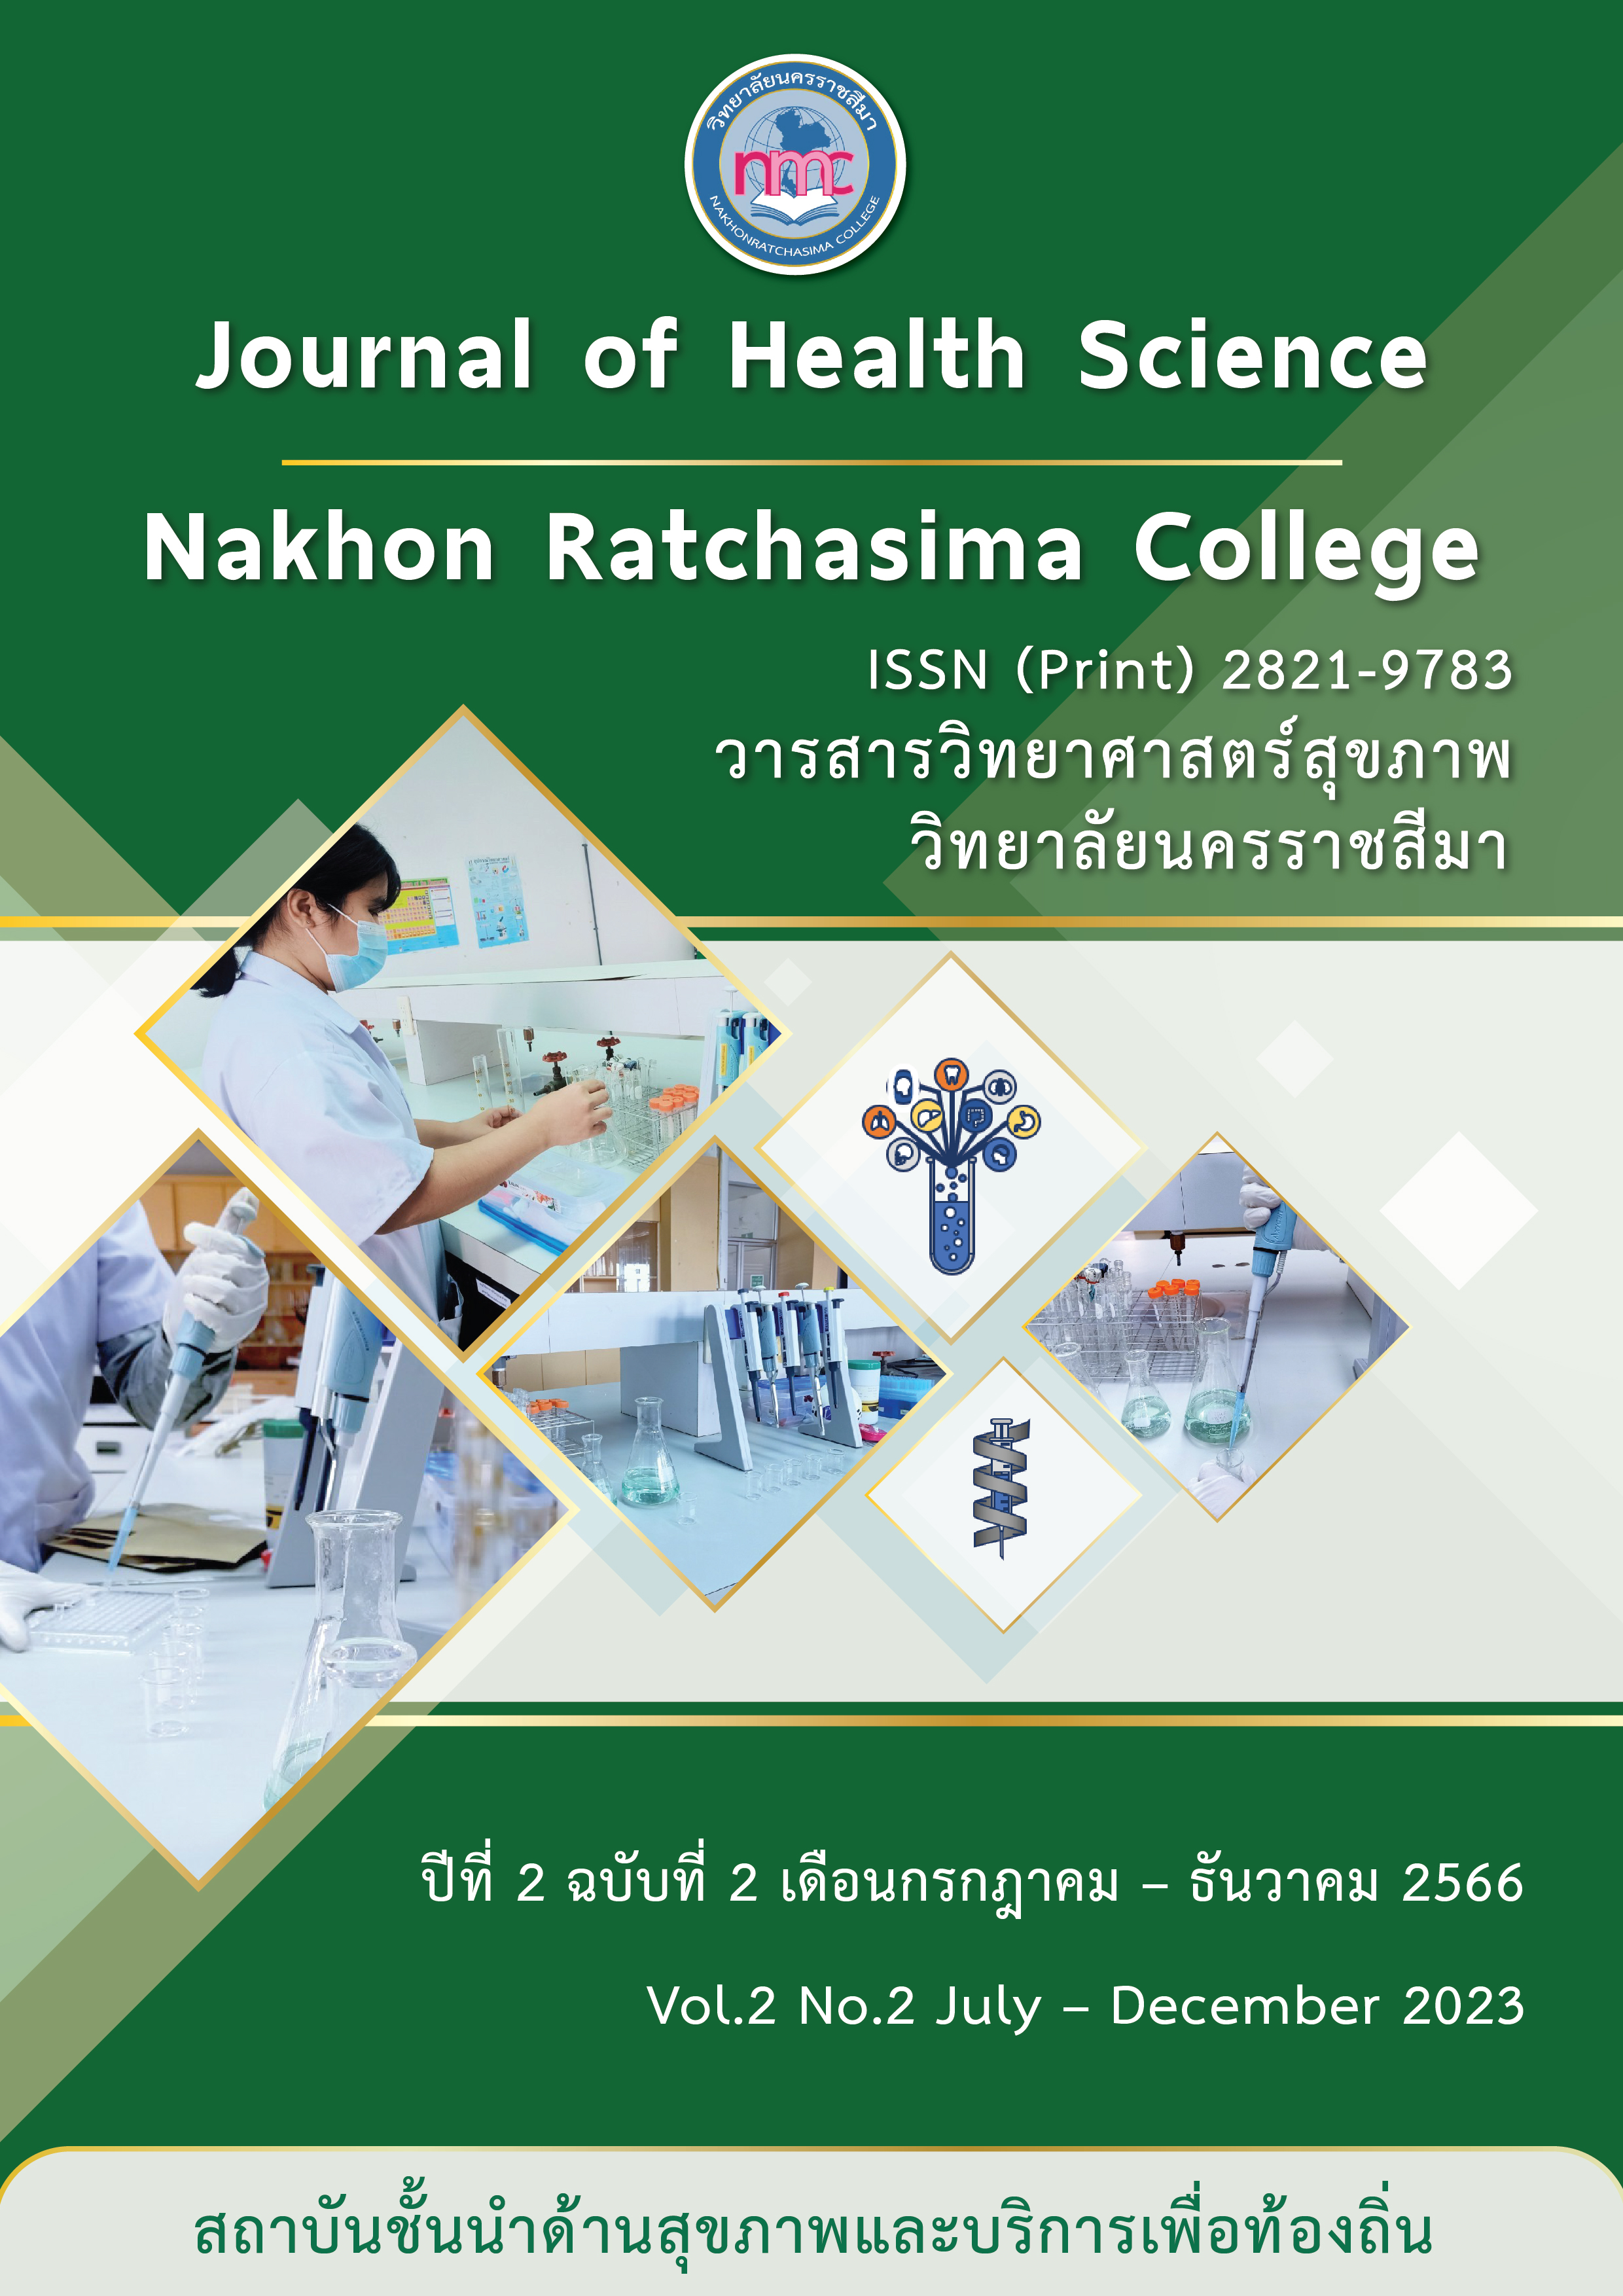 					View Vol. 2 No. 2 (2566): Journal of Health Science Nakhon Ratchasima College
				